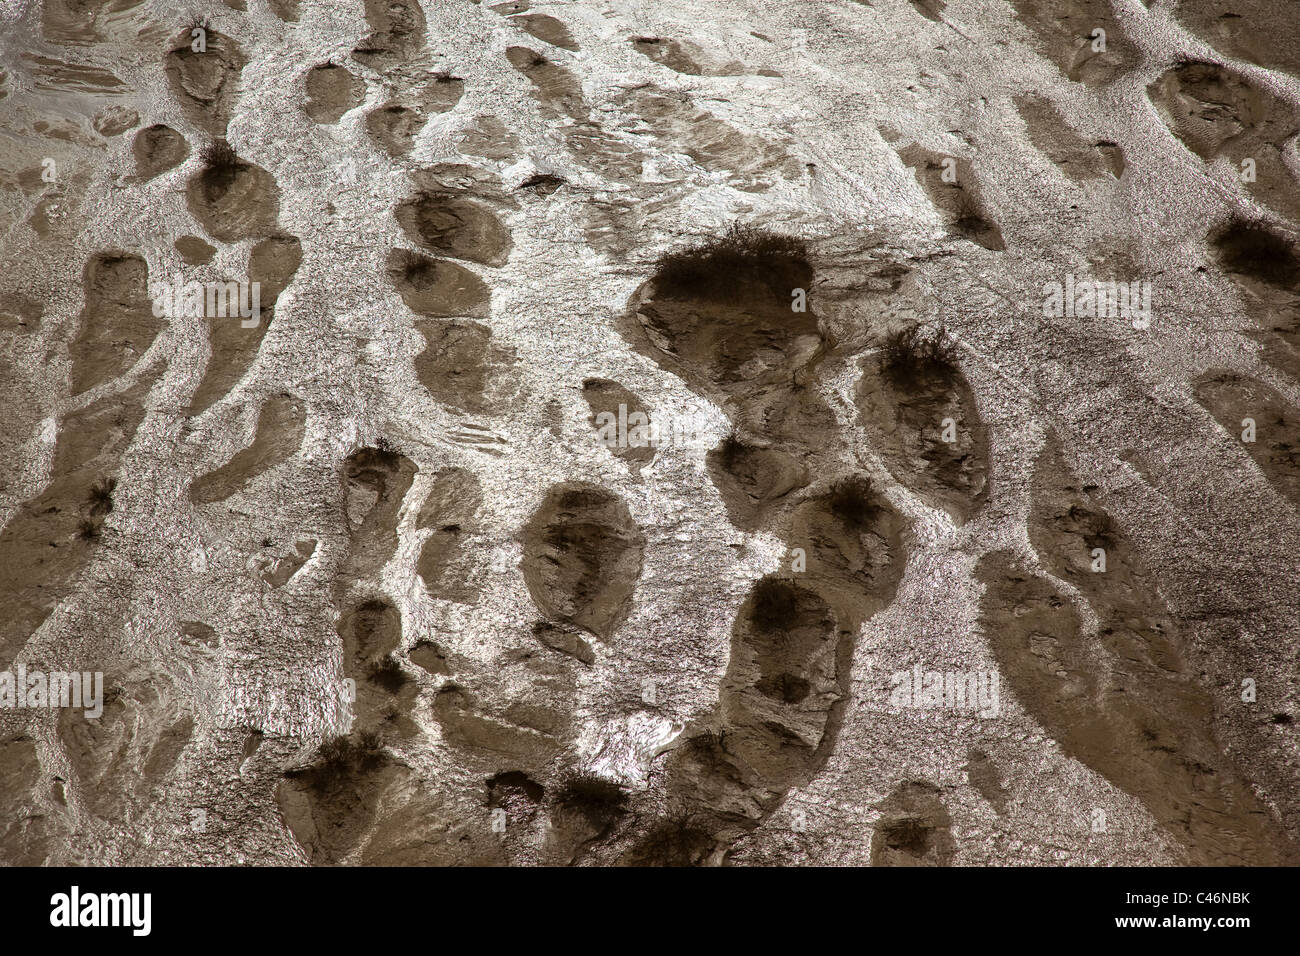 Abstract photograph of a flooded wadi in the Arava Stock Photo